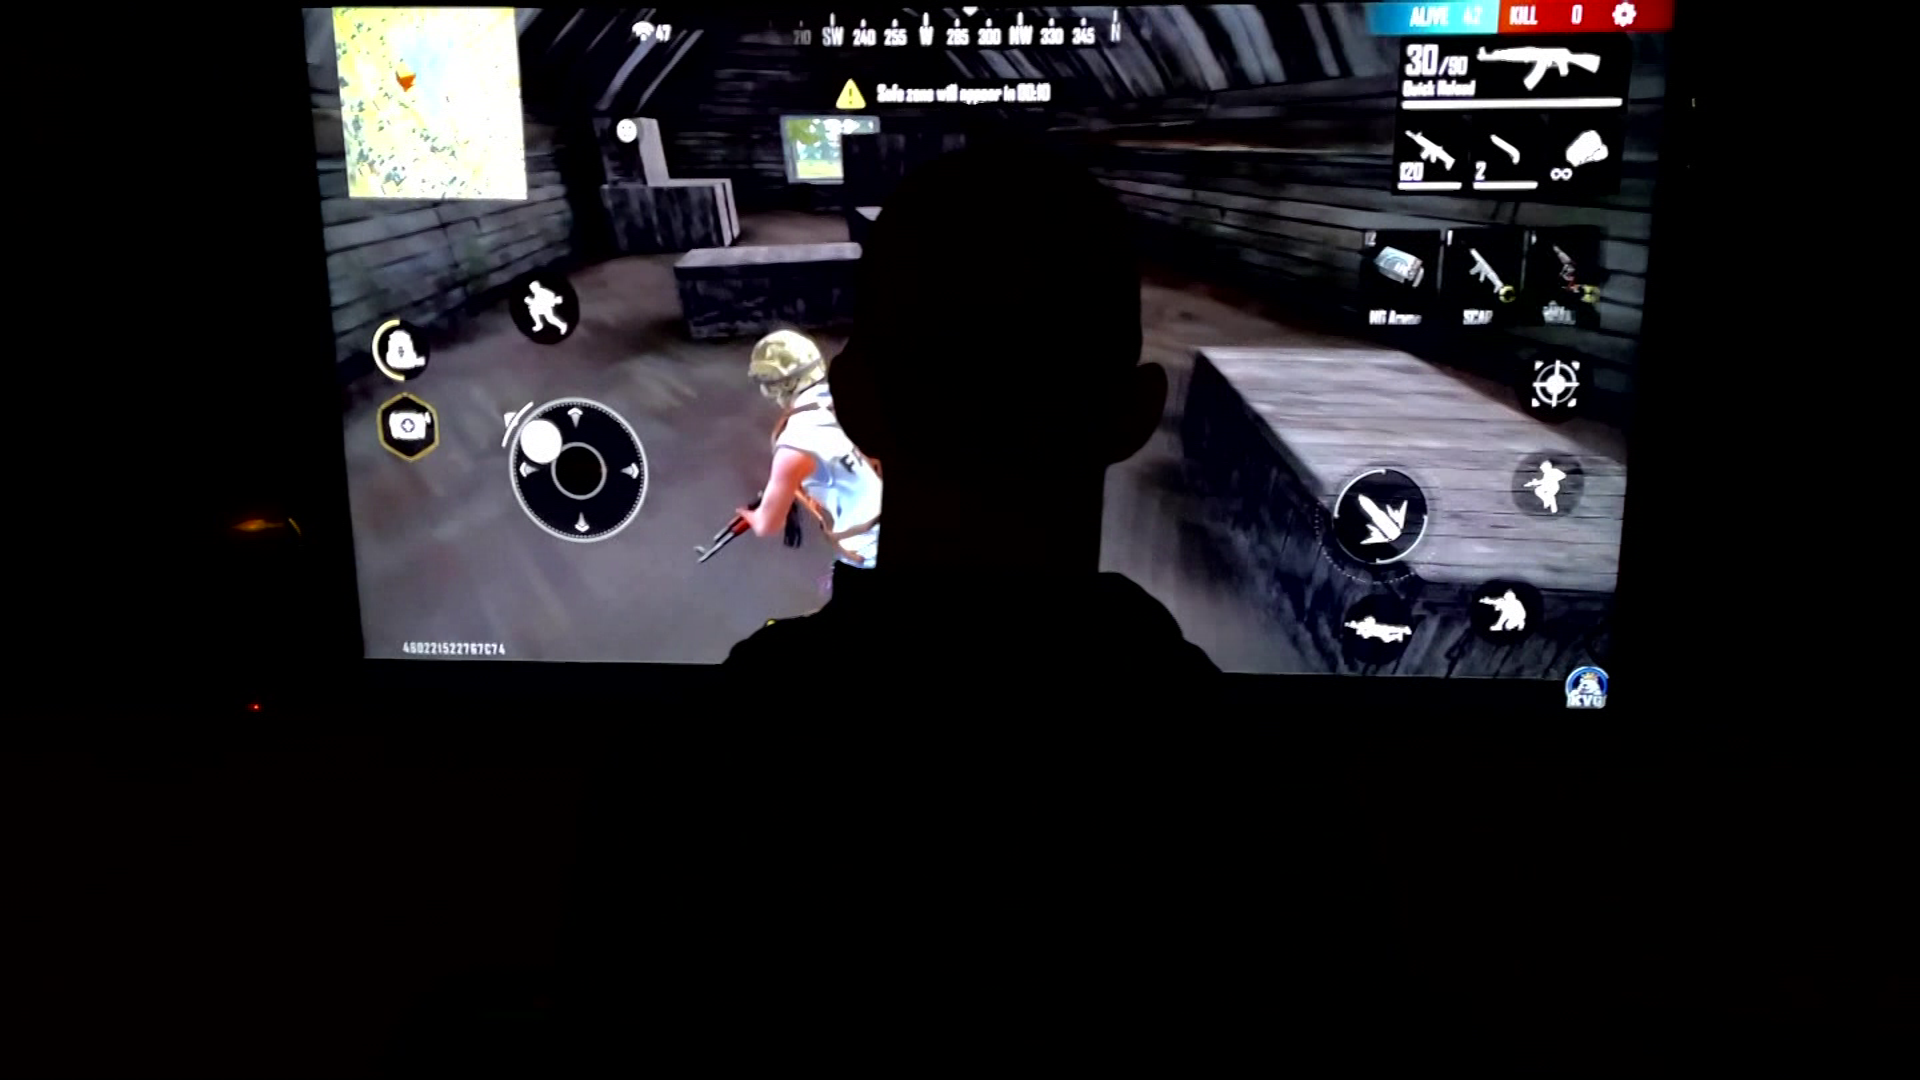 The back of a teenage boy's head is obscured as he plays a video game